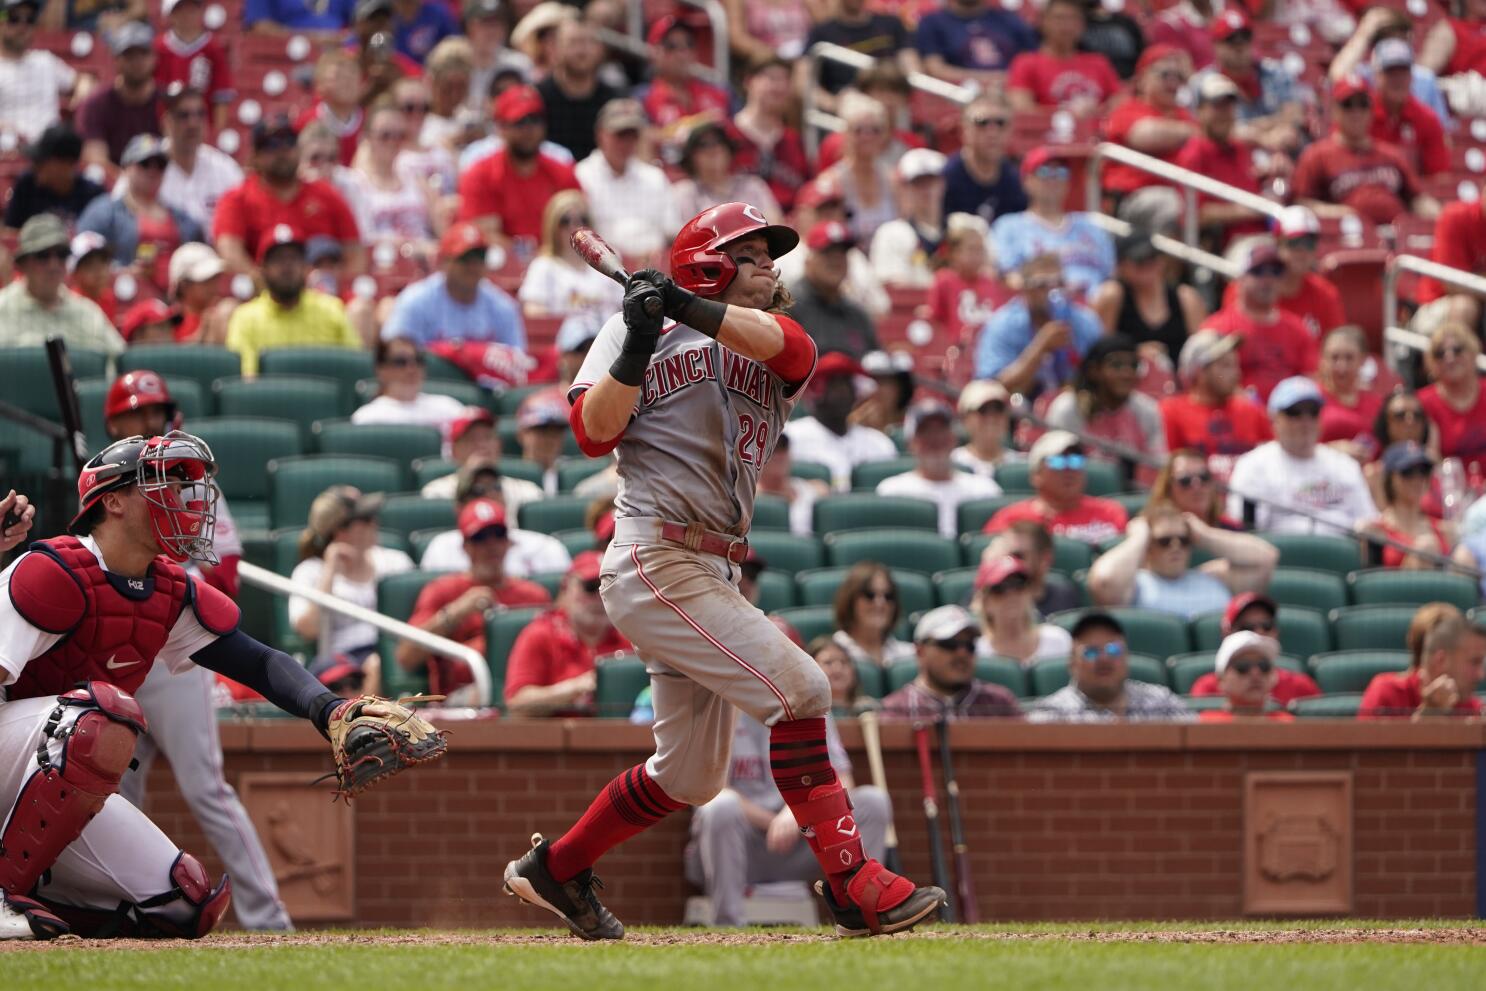 Friedl, Reds snap 4-game skid with 7-6 win over Cardinals - The